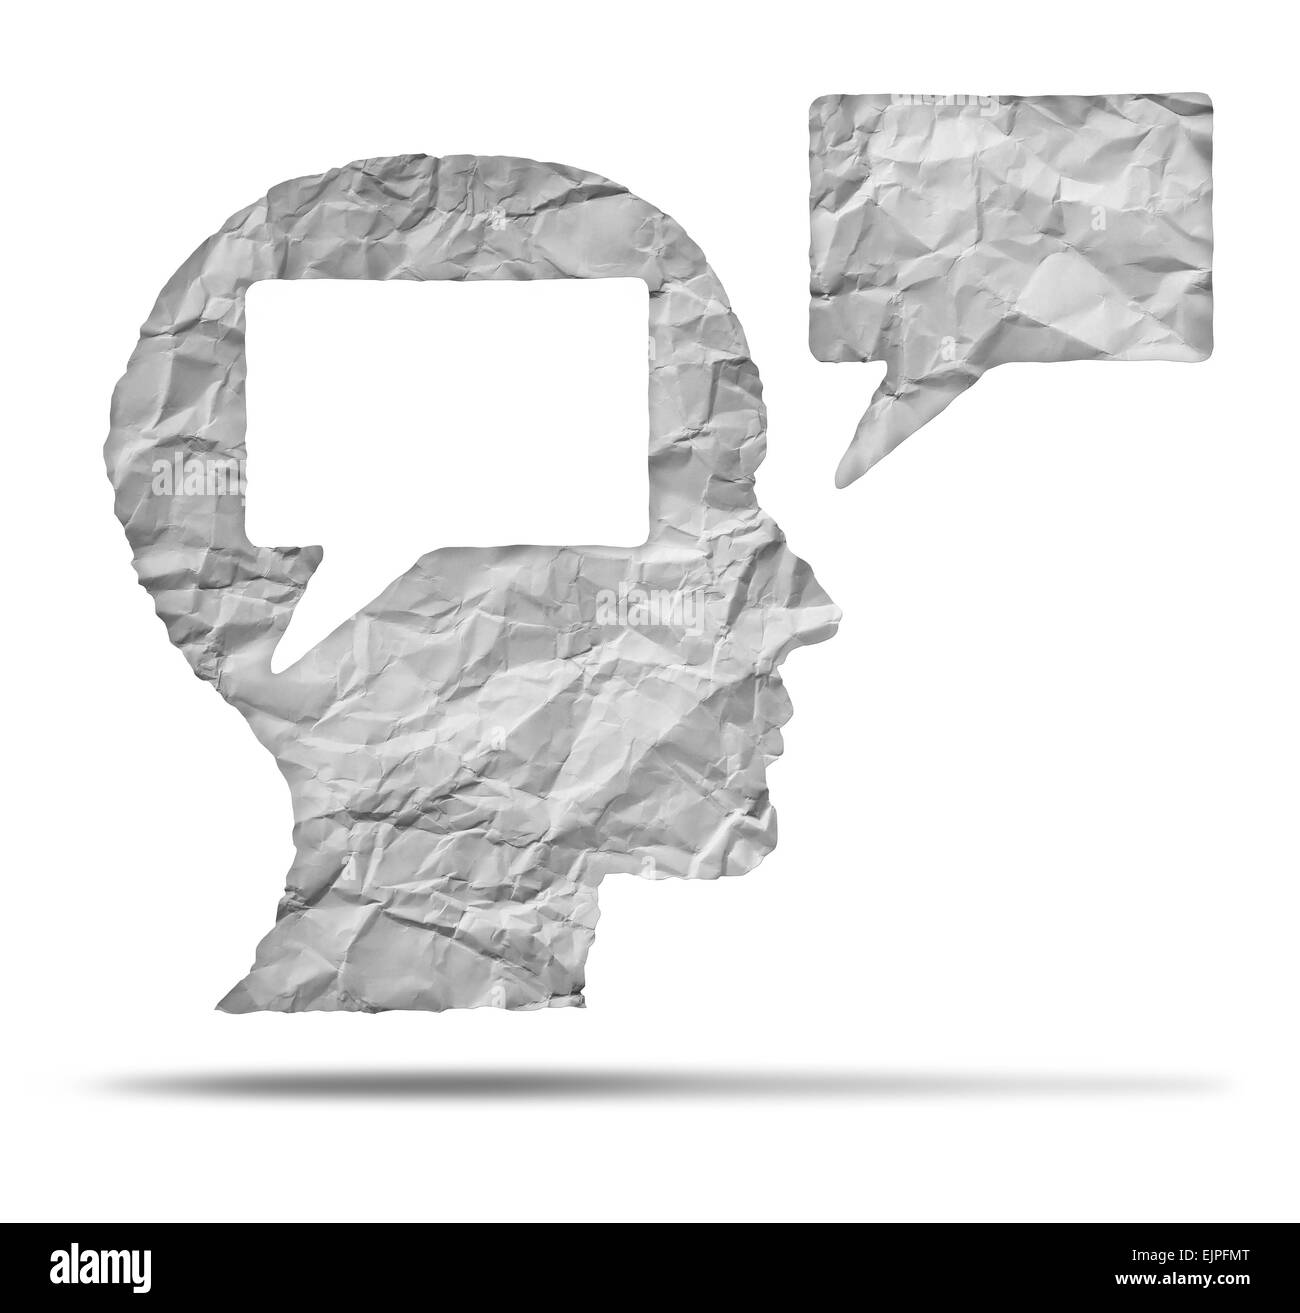 Speak out concept and express your opinion symbol as a crumpled paper shaped as a human head and talk balloon as a communication icon for broadcasting inner thoughts. Stock Photo